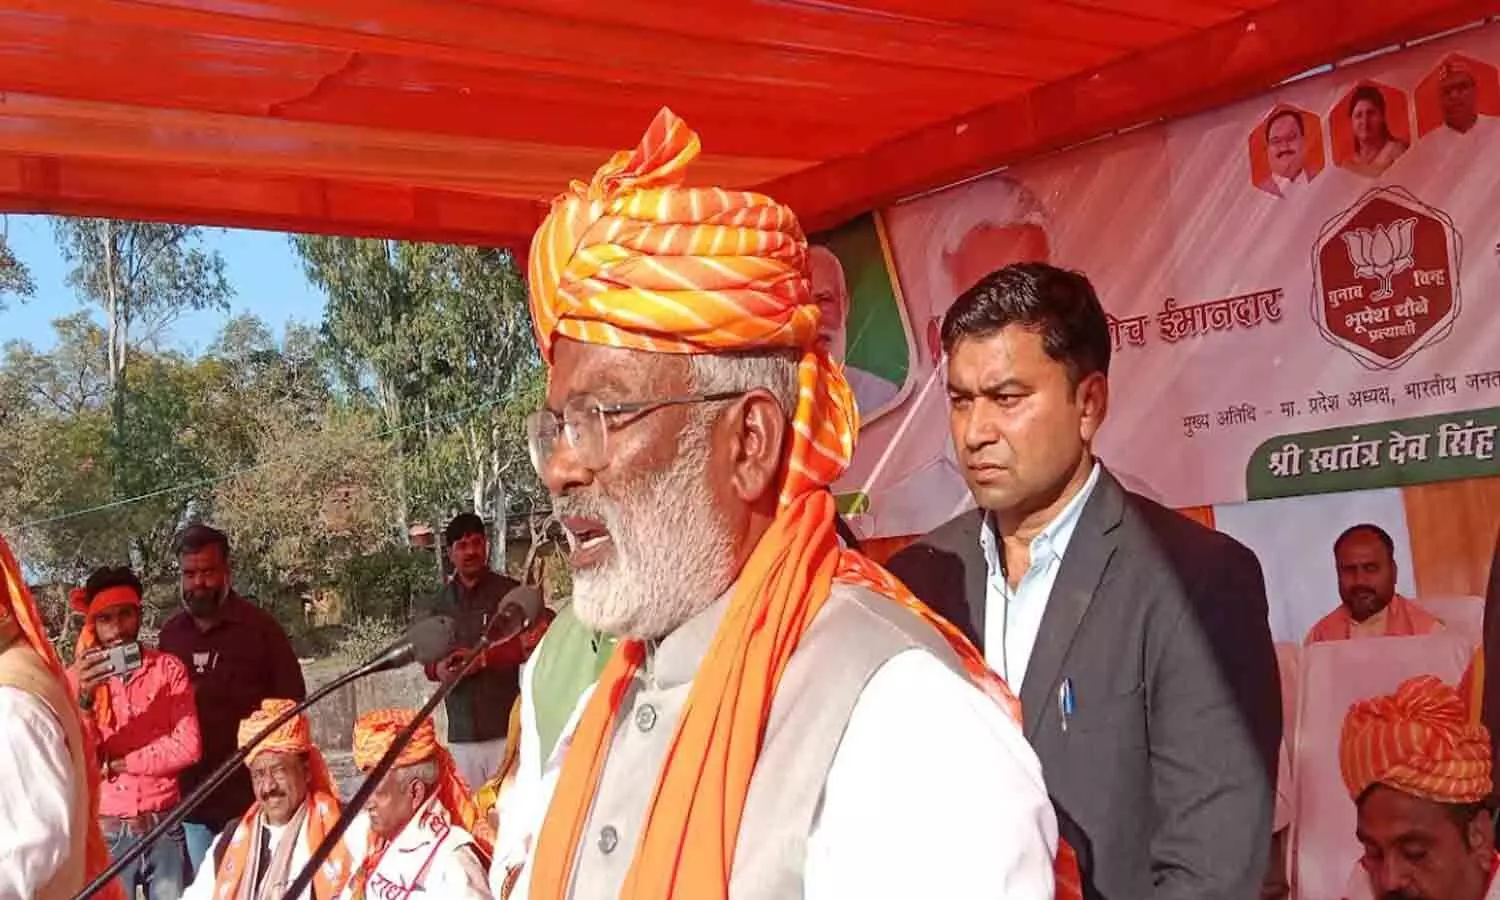 UP Election 2022: BJP State President Swatantra Dev Singh said – BJP has ended the empire of hooliganism and terror